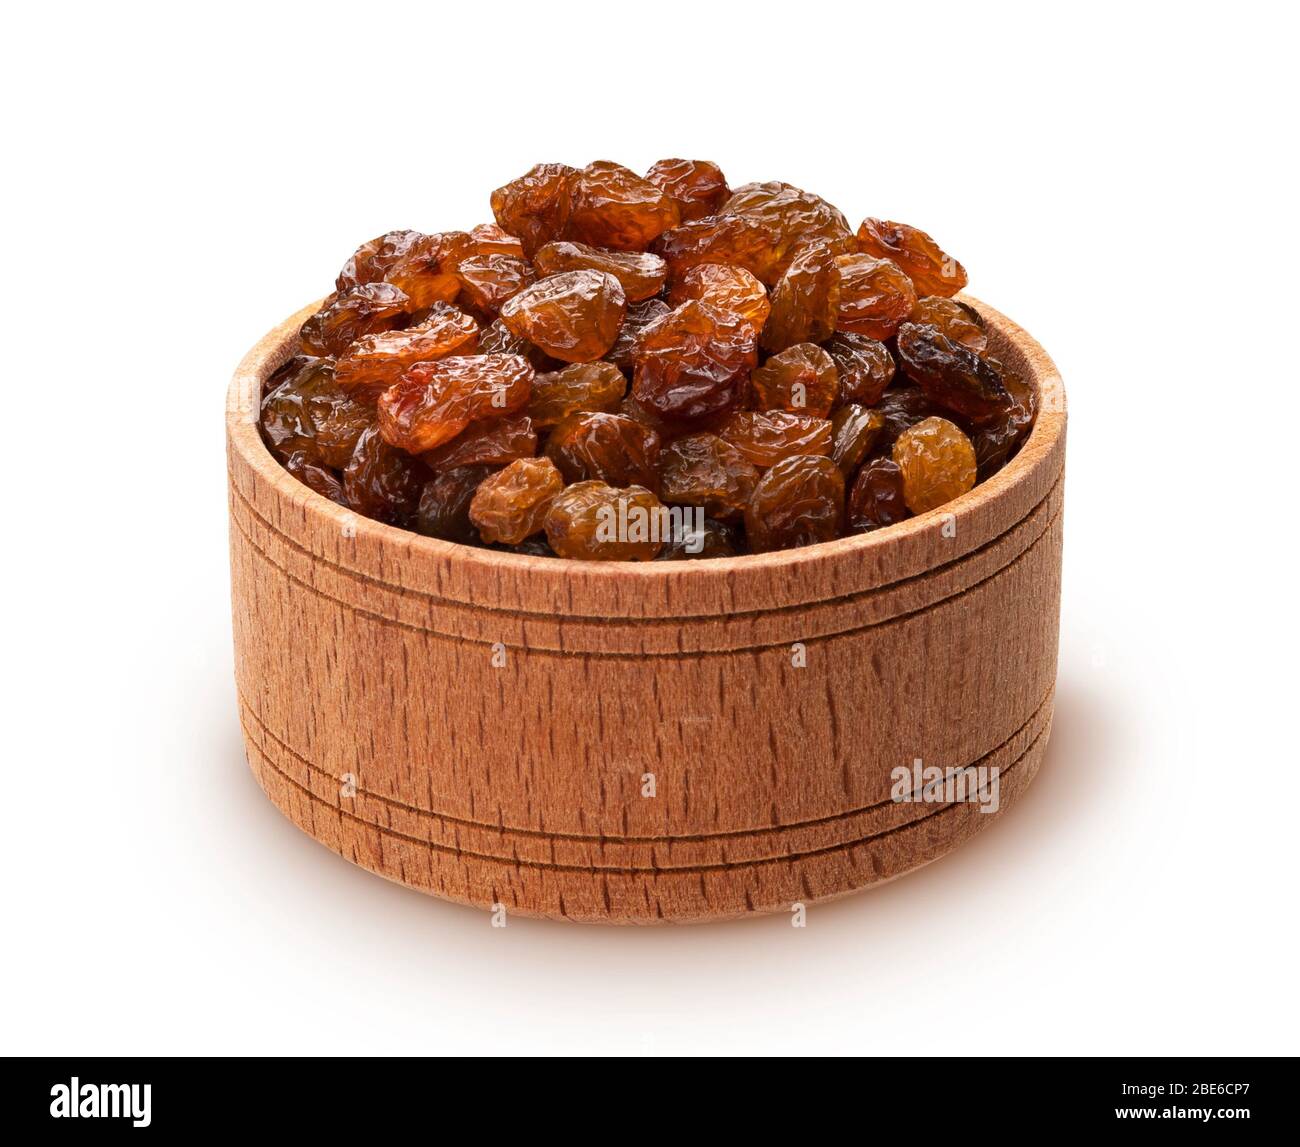 Raisins in wooden bowl isolated on white background Stock Photo